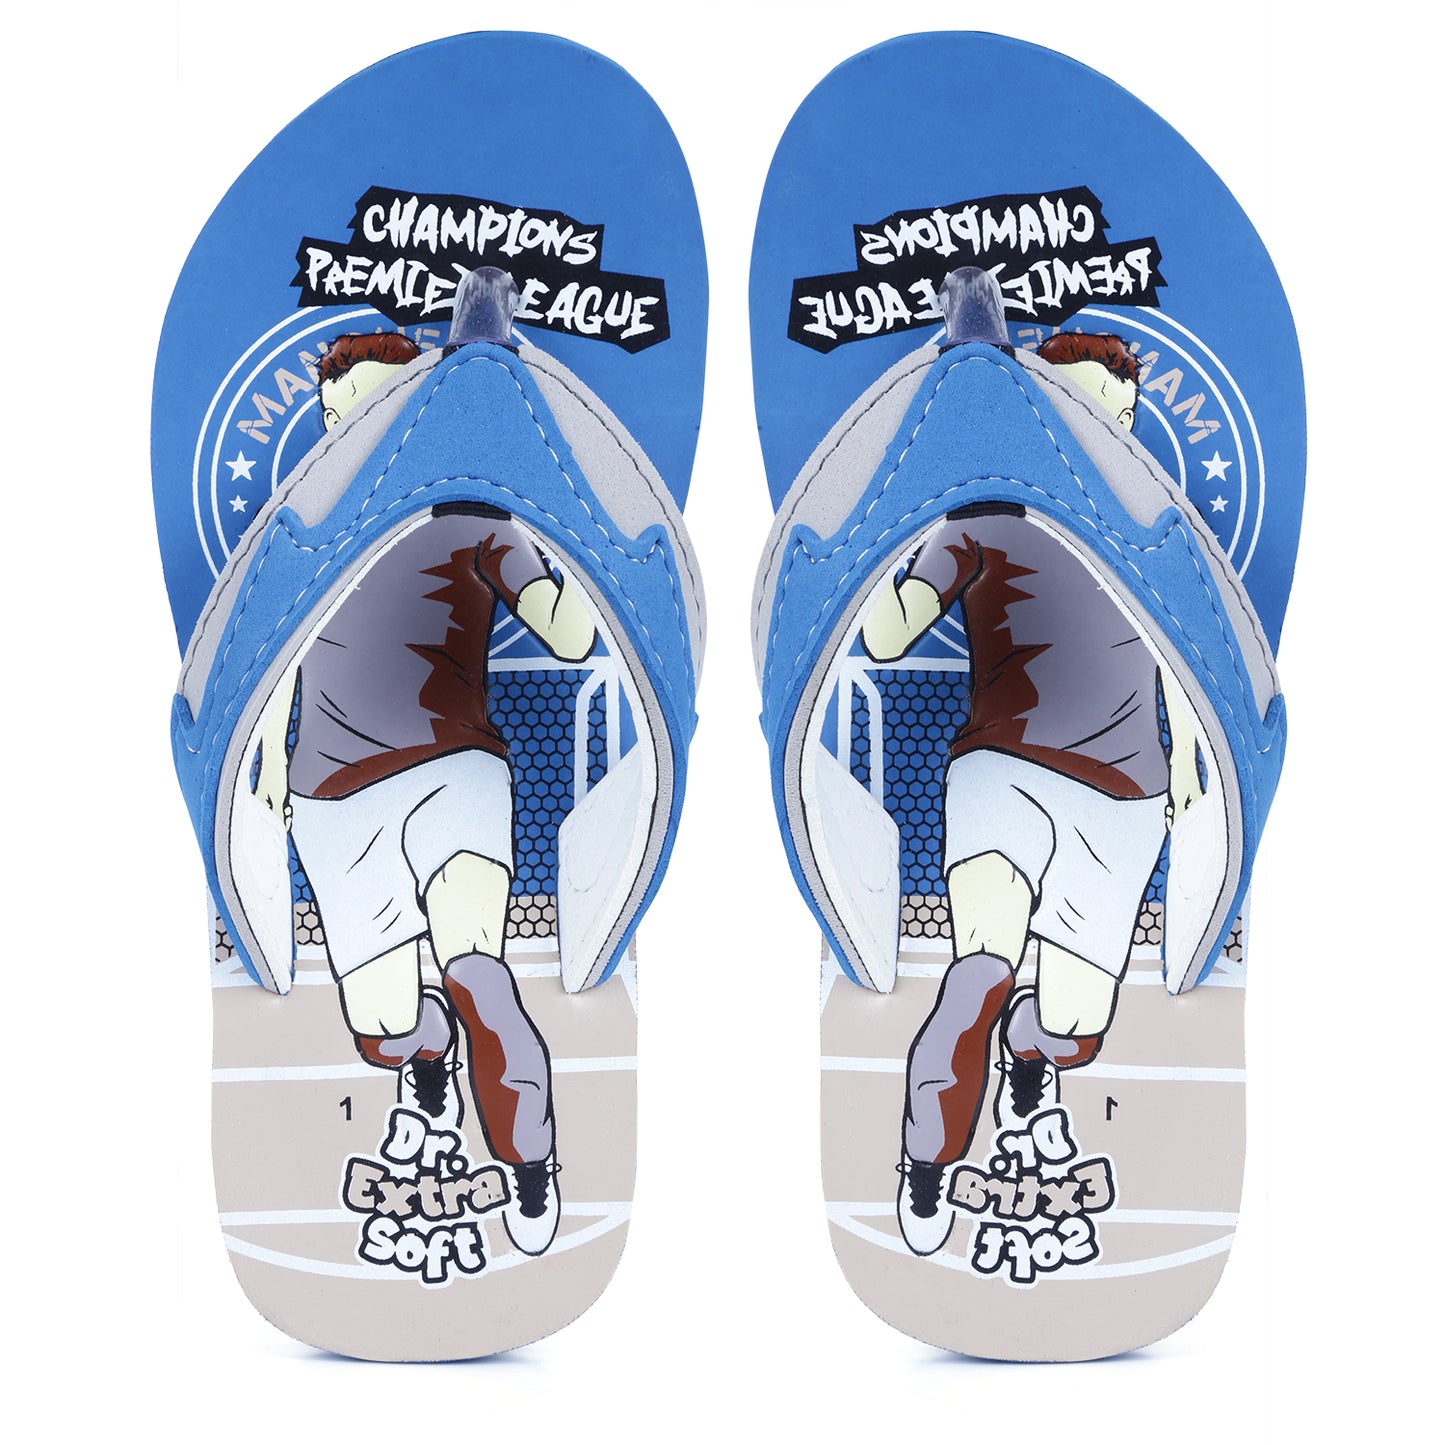 DOCTOR EXTRA SOFT Unisex-Child Kids Flip-Flop (Champions Print) Soft Comfortable Indoor & Outdoor Slippers Stylish Non-Slip Slide Home Casual Cool Cartoon Cute House Chappals For Boys & Girls